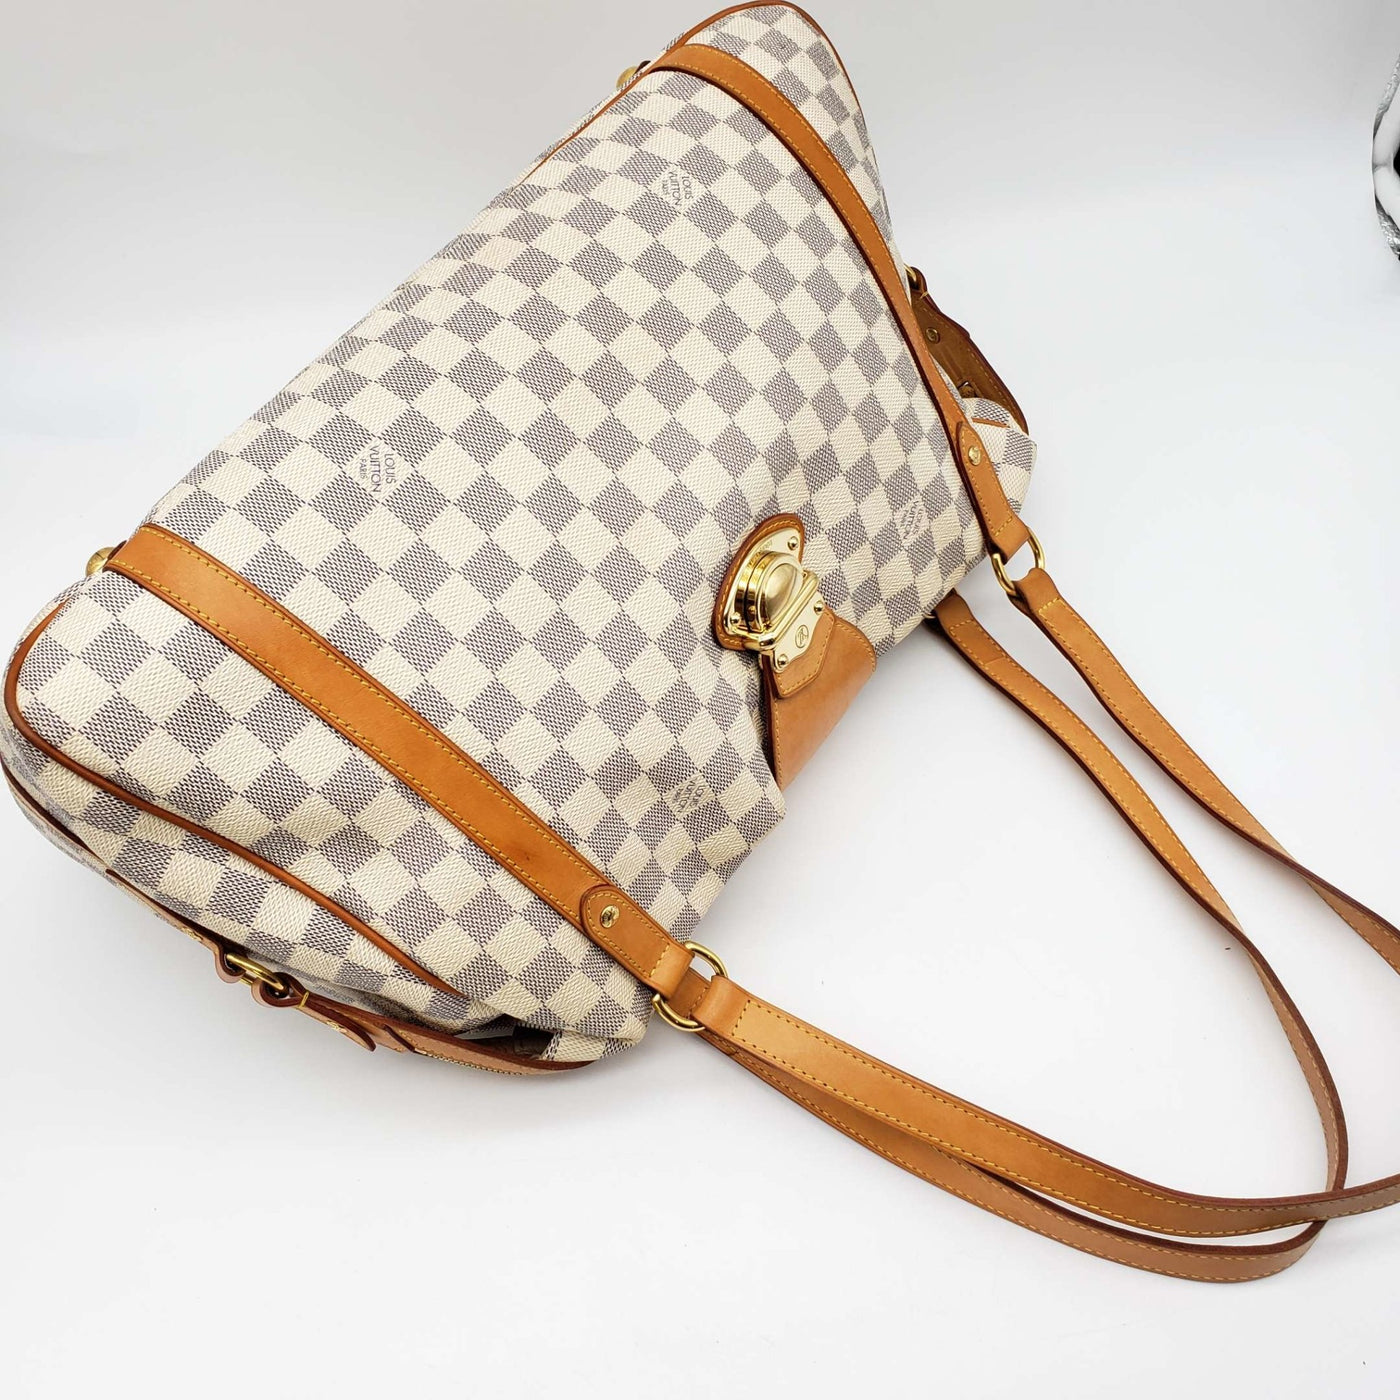 Bring N Buy on Instagram: Louis Vuitton Stresa Damier Azur PM All items  are authentic and we are not affiliated with any brands we sell